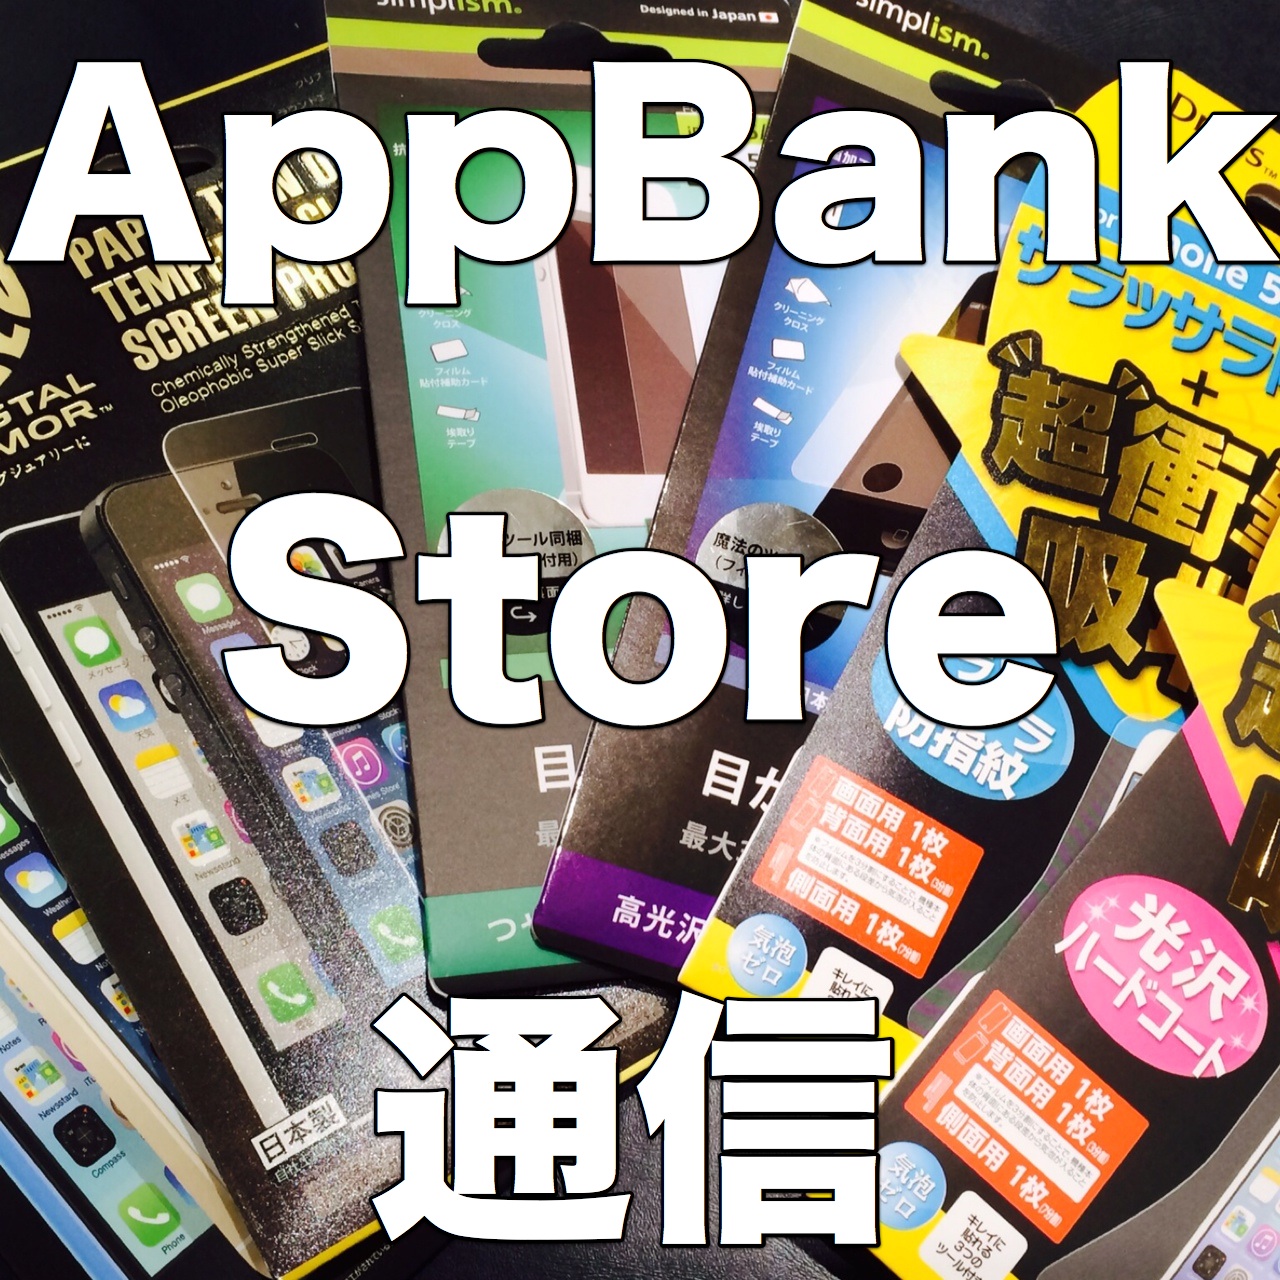 [AppBank Store通信] AppBank Store新宿はもうすぐ1周年! たくさんの記念企画を計画中!